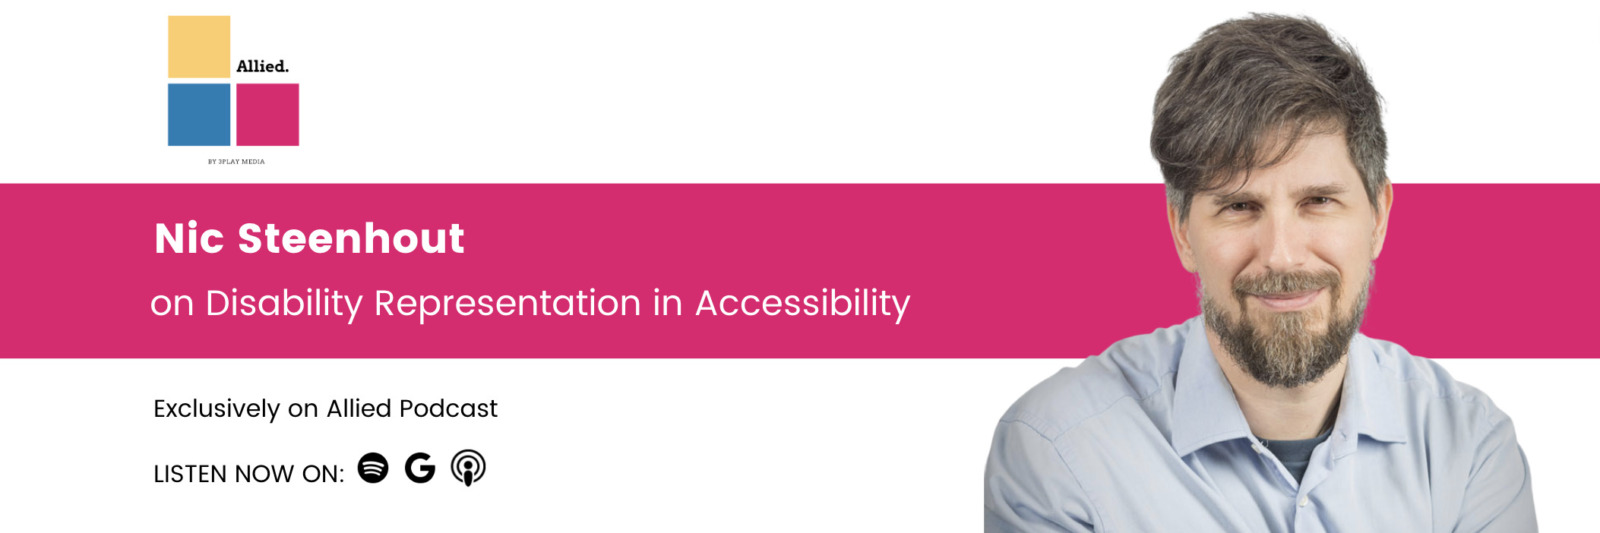 Nic Steenhout on disability representation in accessibility. Listen now on Spotify, Google Podcasts, or Apple Podcasts.